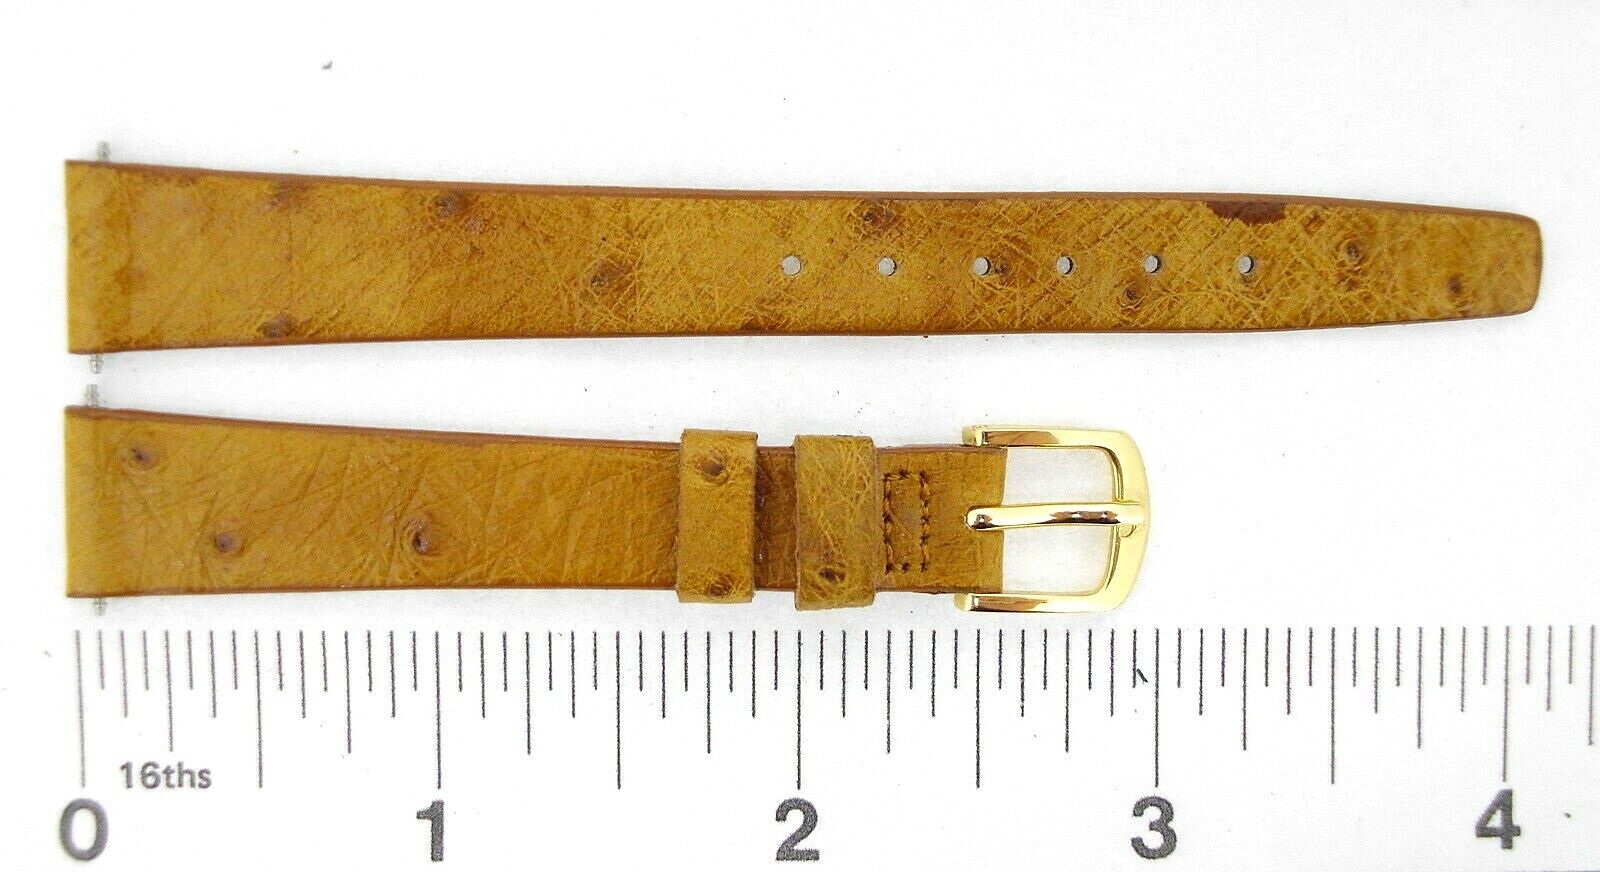 Watchband GENUINE AMERICAN EMU leather watch strap various color widths